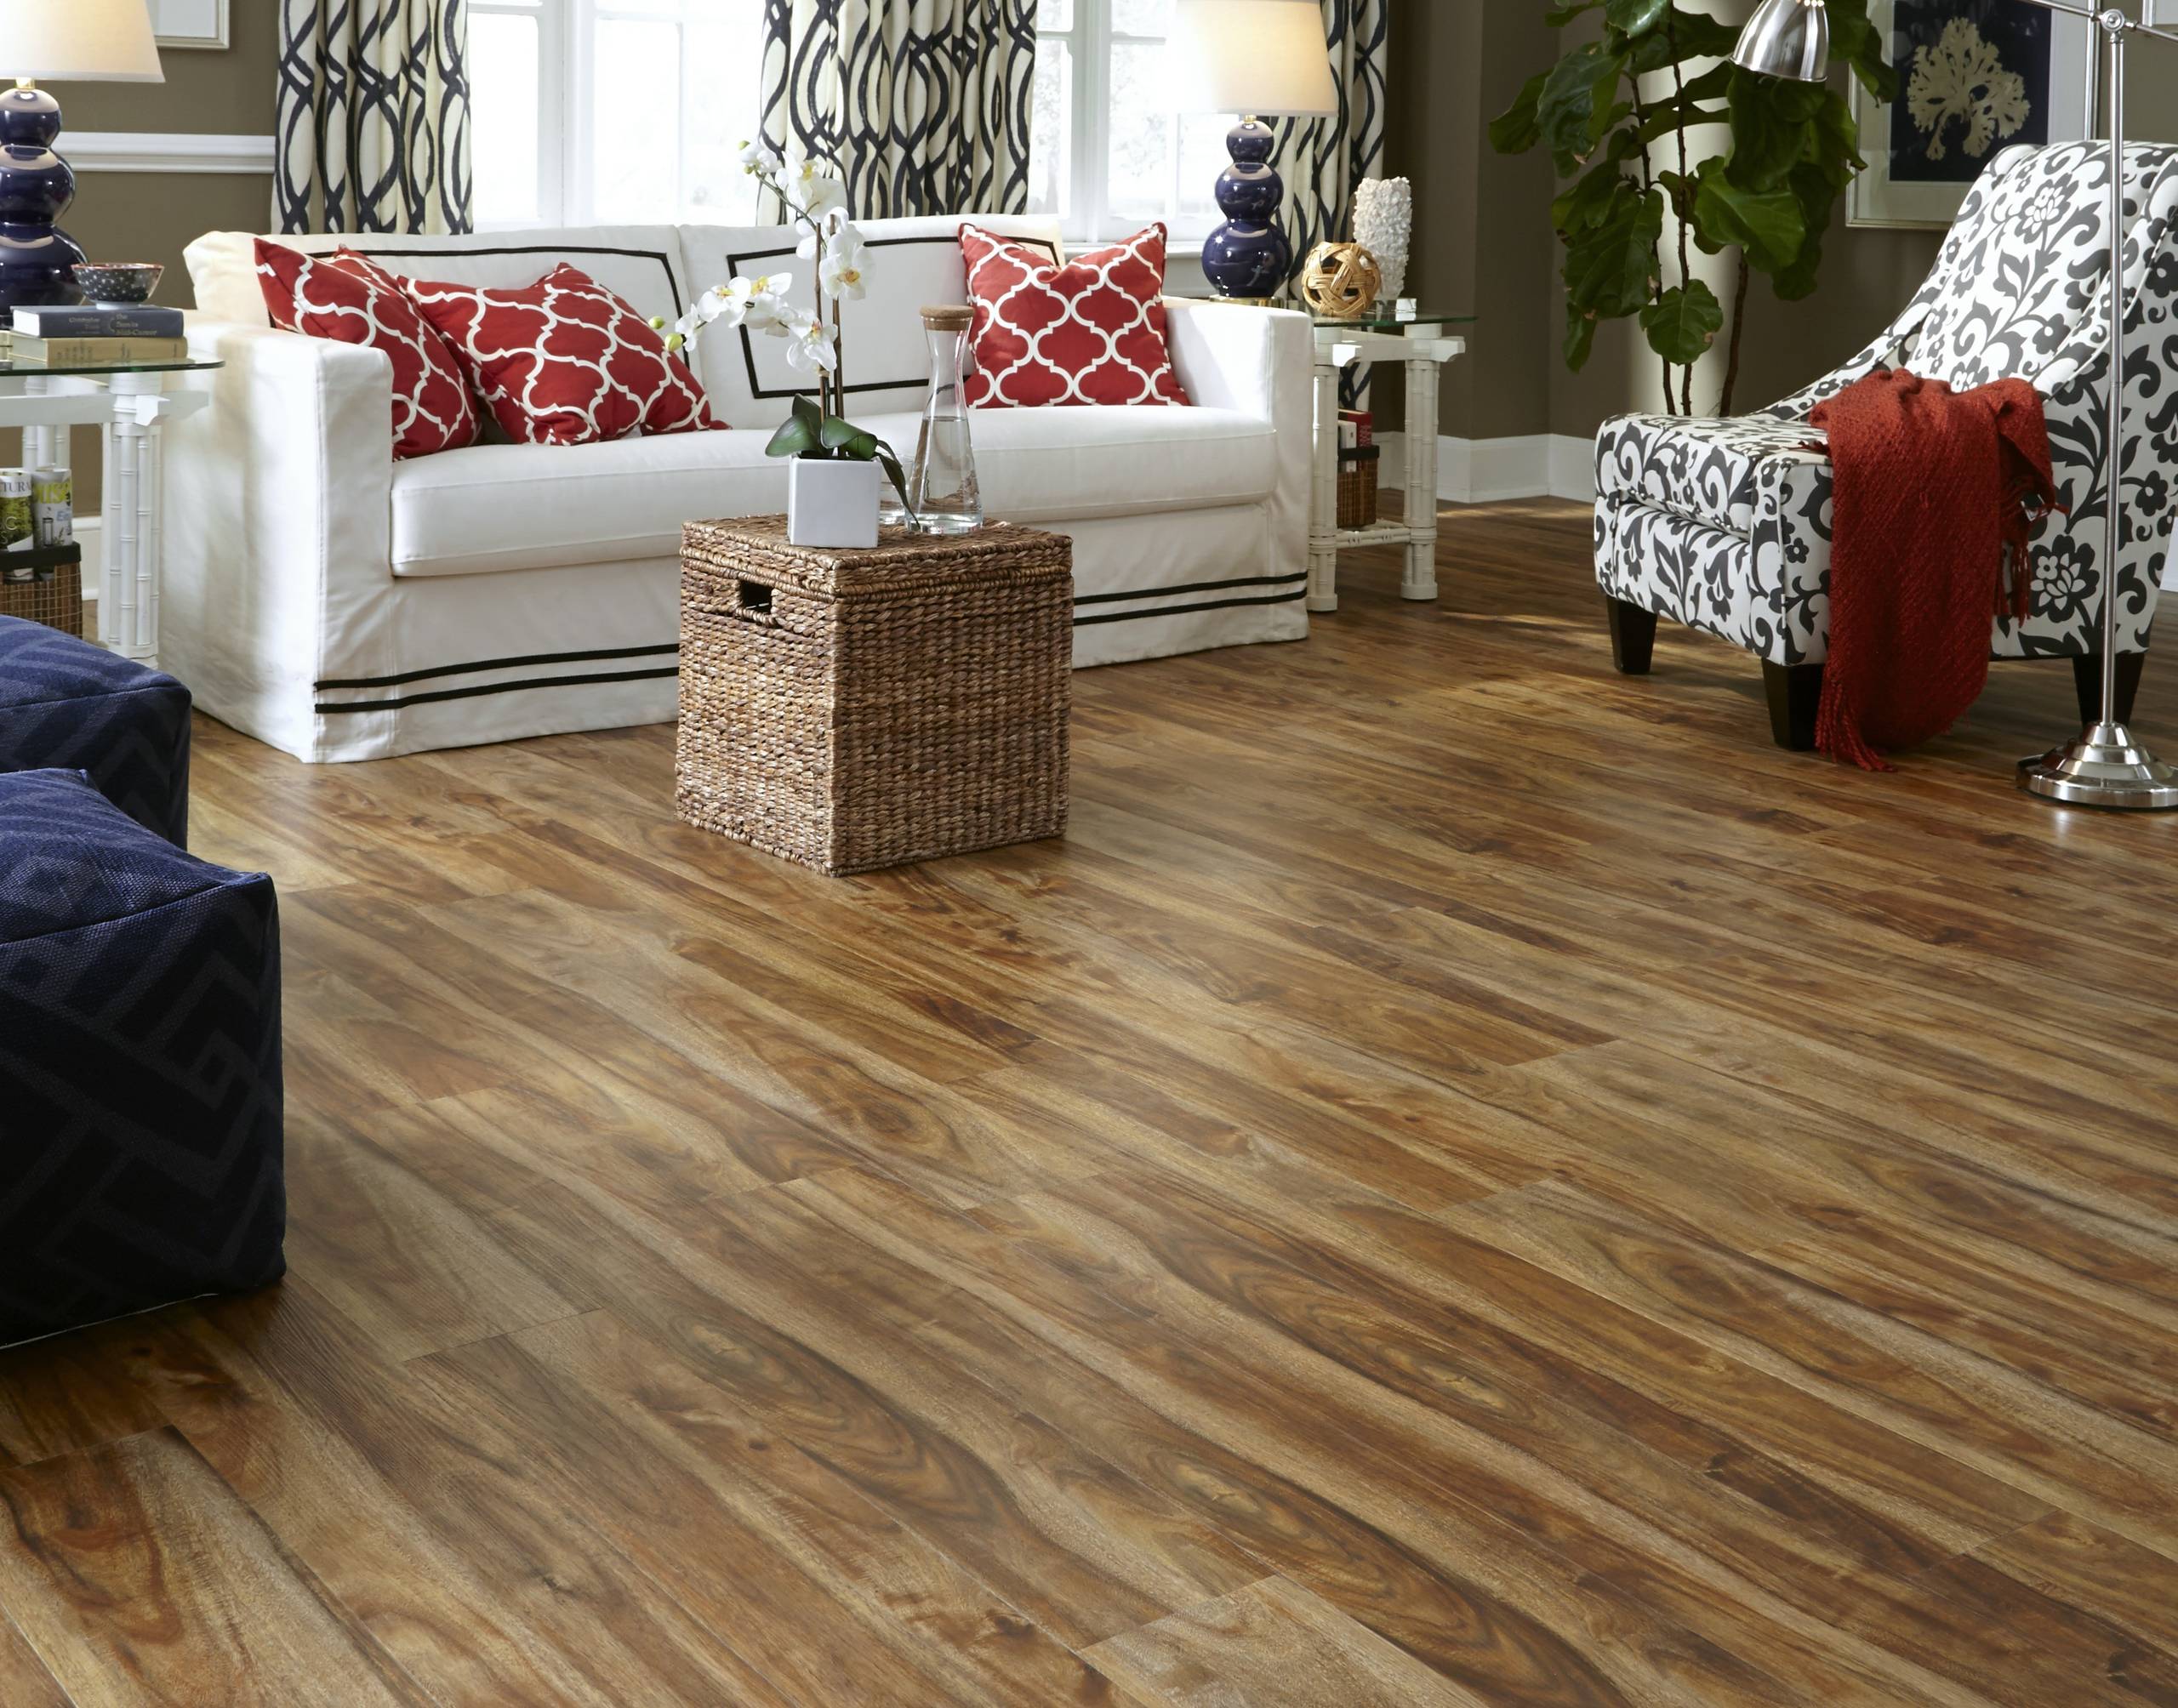 Tranquility 5mm Rustic Acacia Click Resilient Vinyl Flooring Contemporary Living Room Other By Ll Flooring Houzz